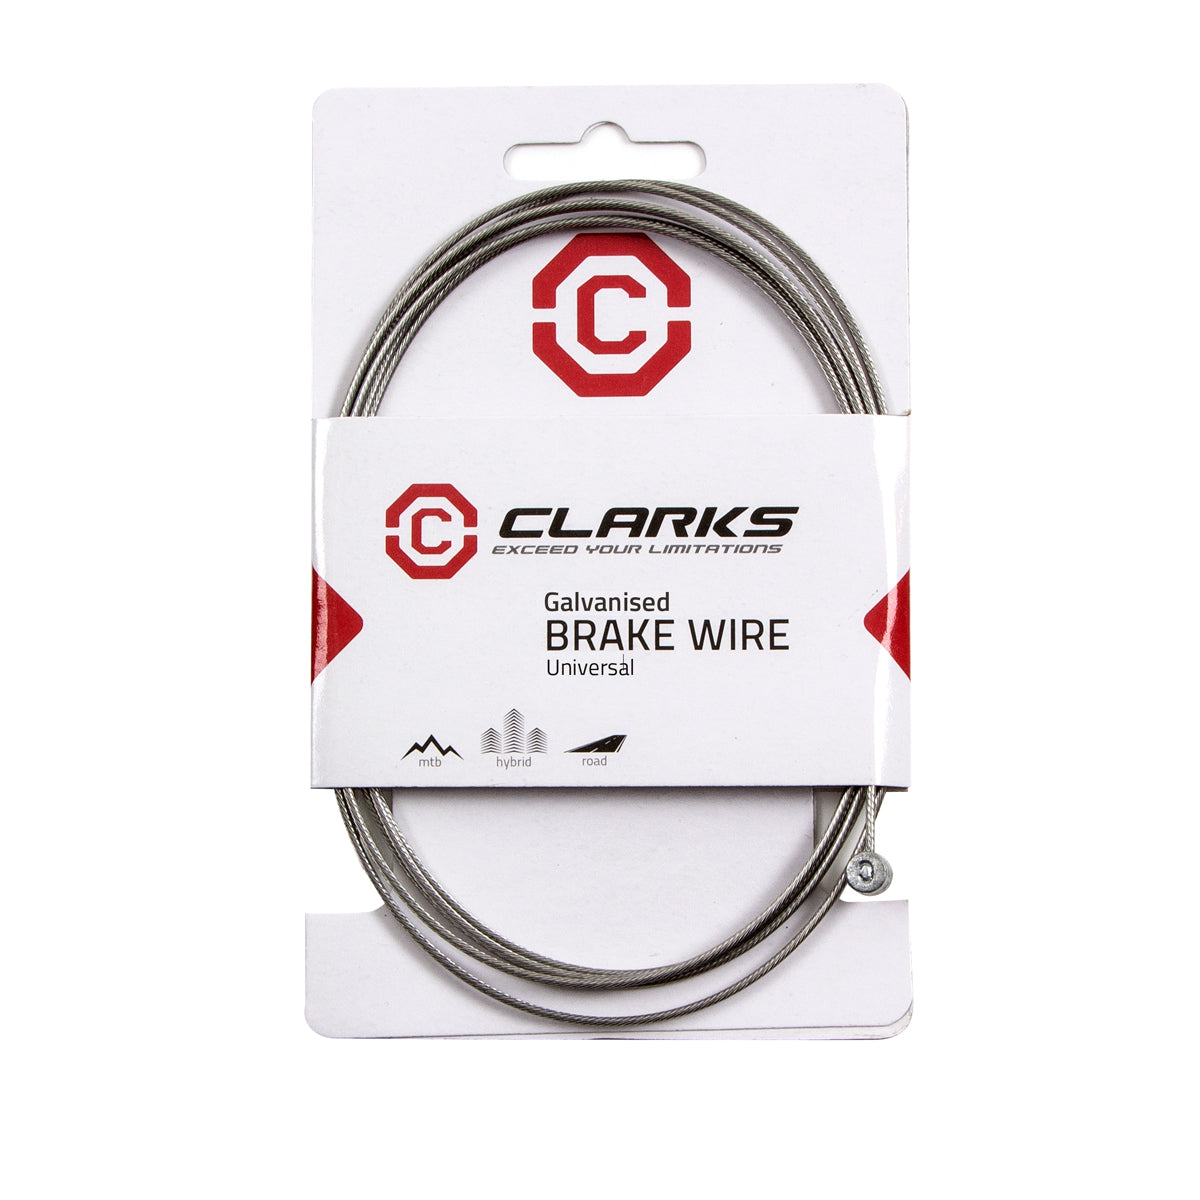 View Clarks Brake and Gear Inner wire Universal fit Road MTB 1 x Brake Wire information